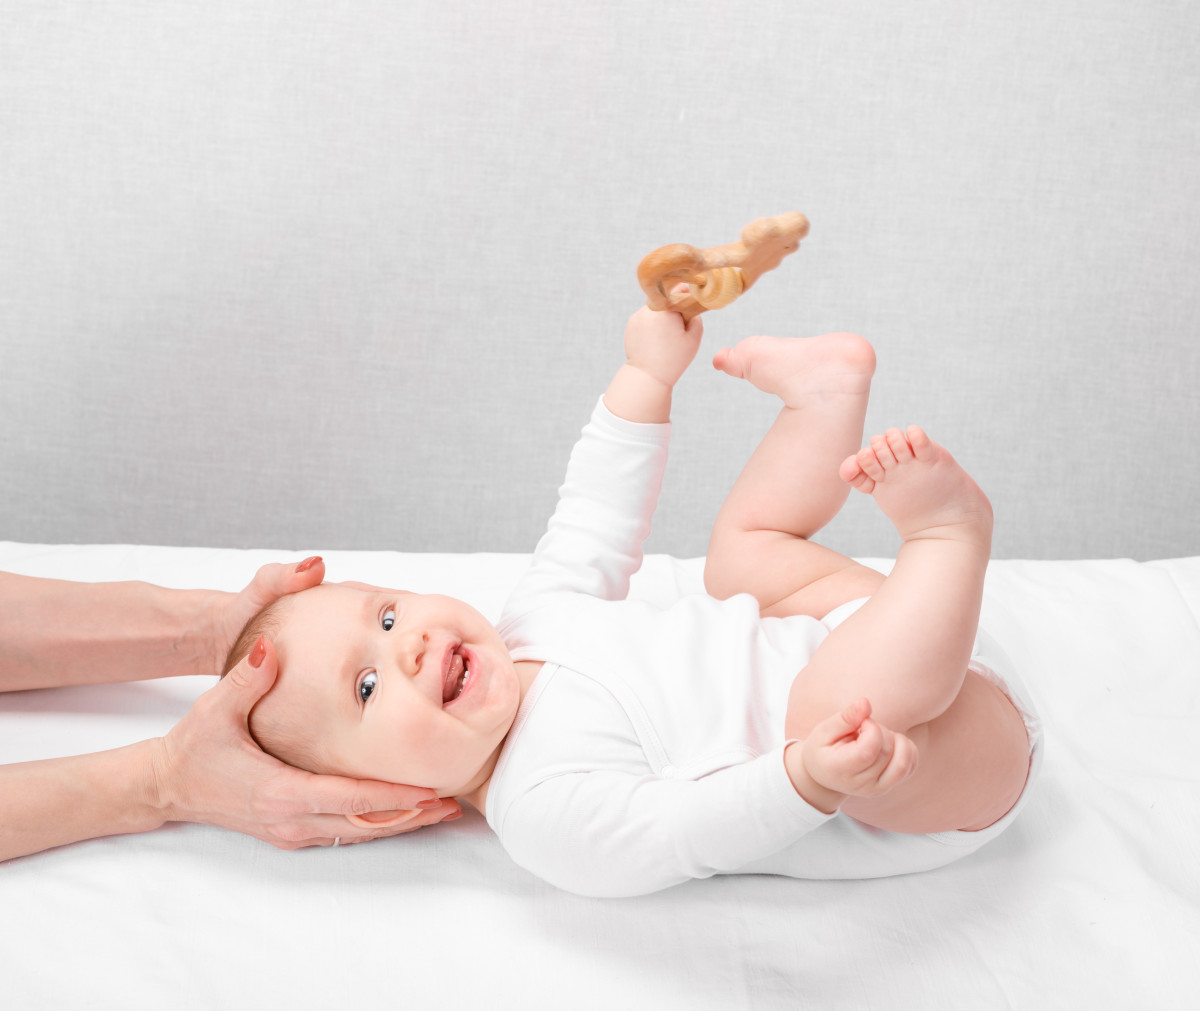 Gentle osteopathic techniques that calm and help your baby feel more comfortable. 